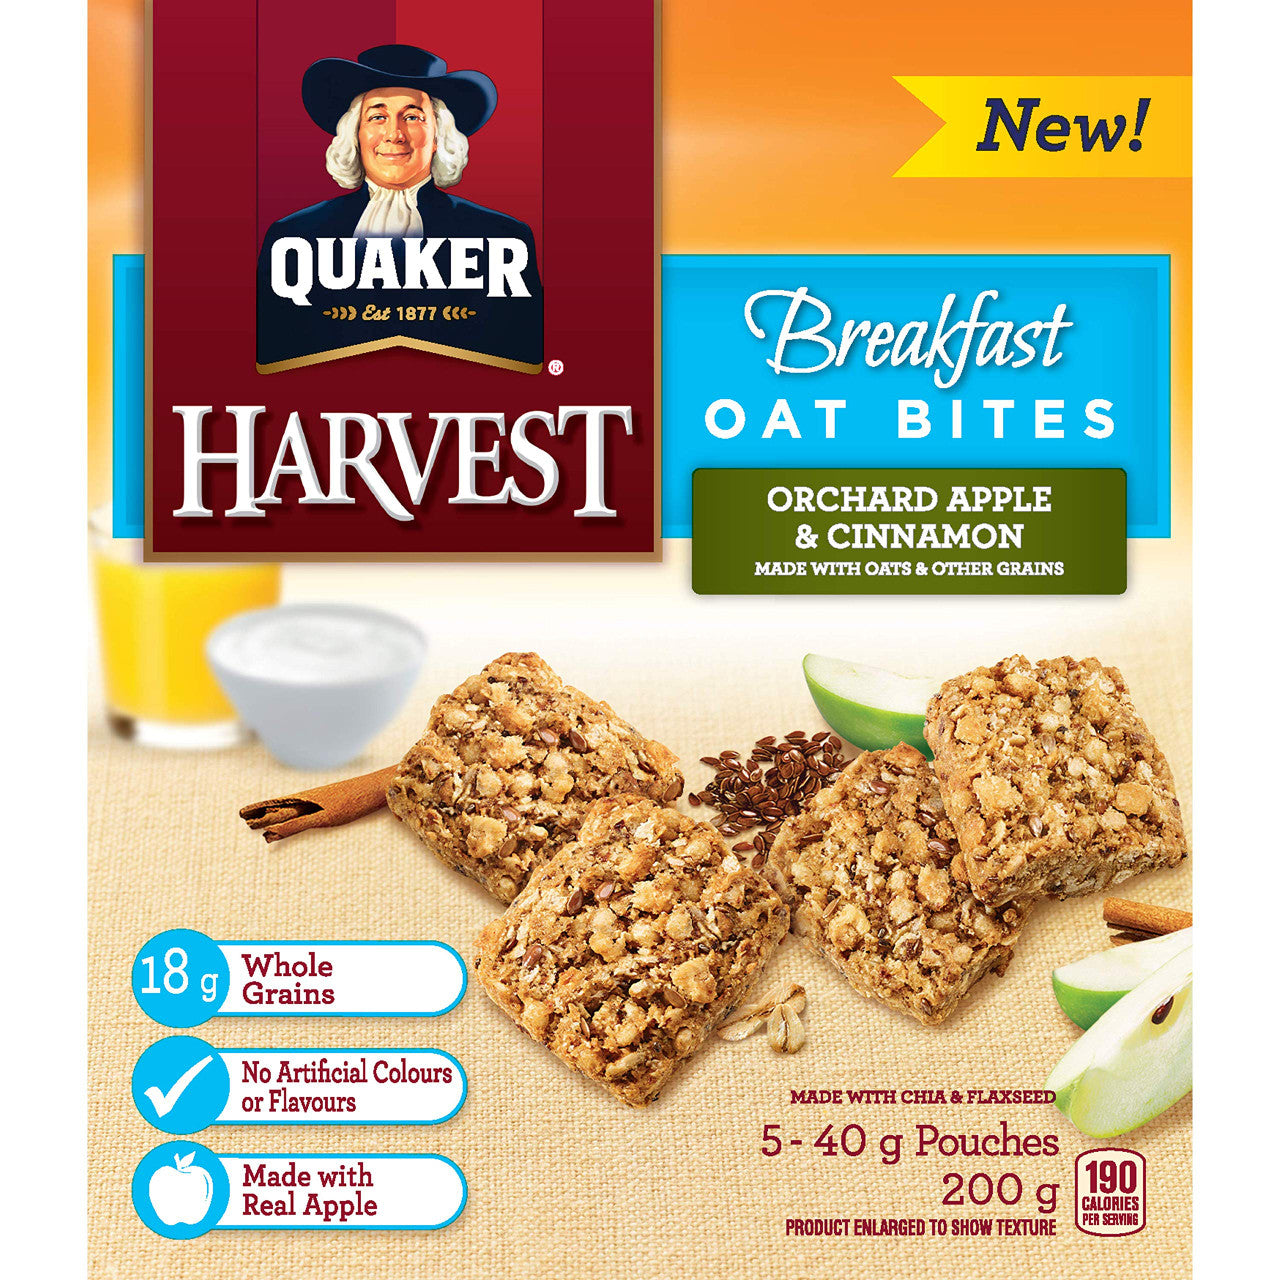 Quaker Breakfast Oat Bites, 5 x 40g Pouches, Orchard Apple & Cinnamon, 200g/7.1oz Box, {Imported from Canada}